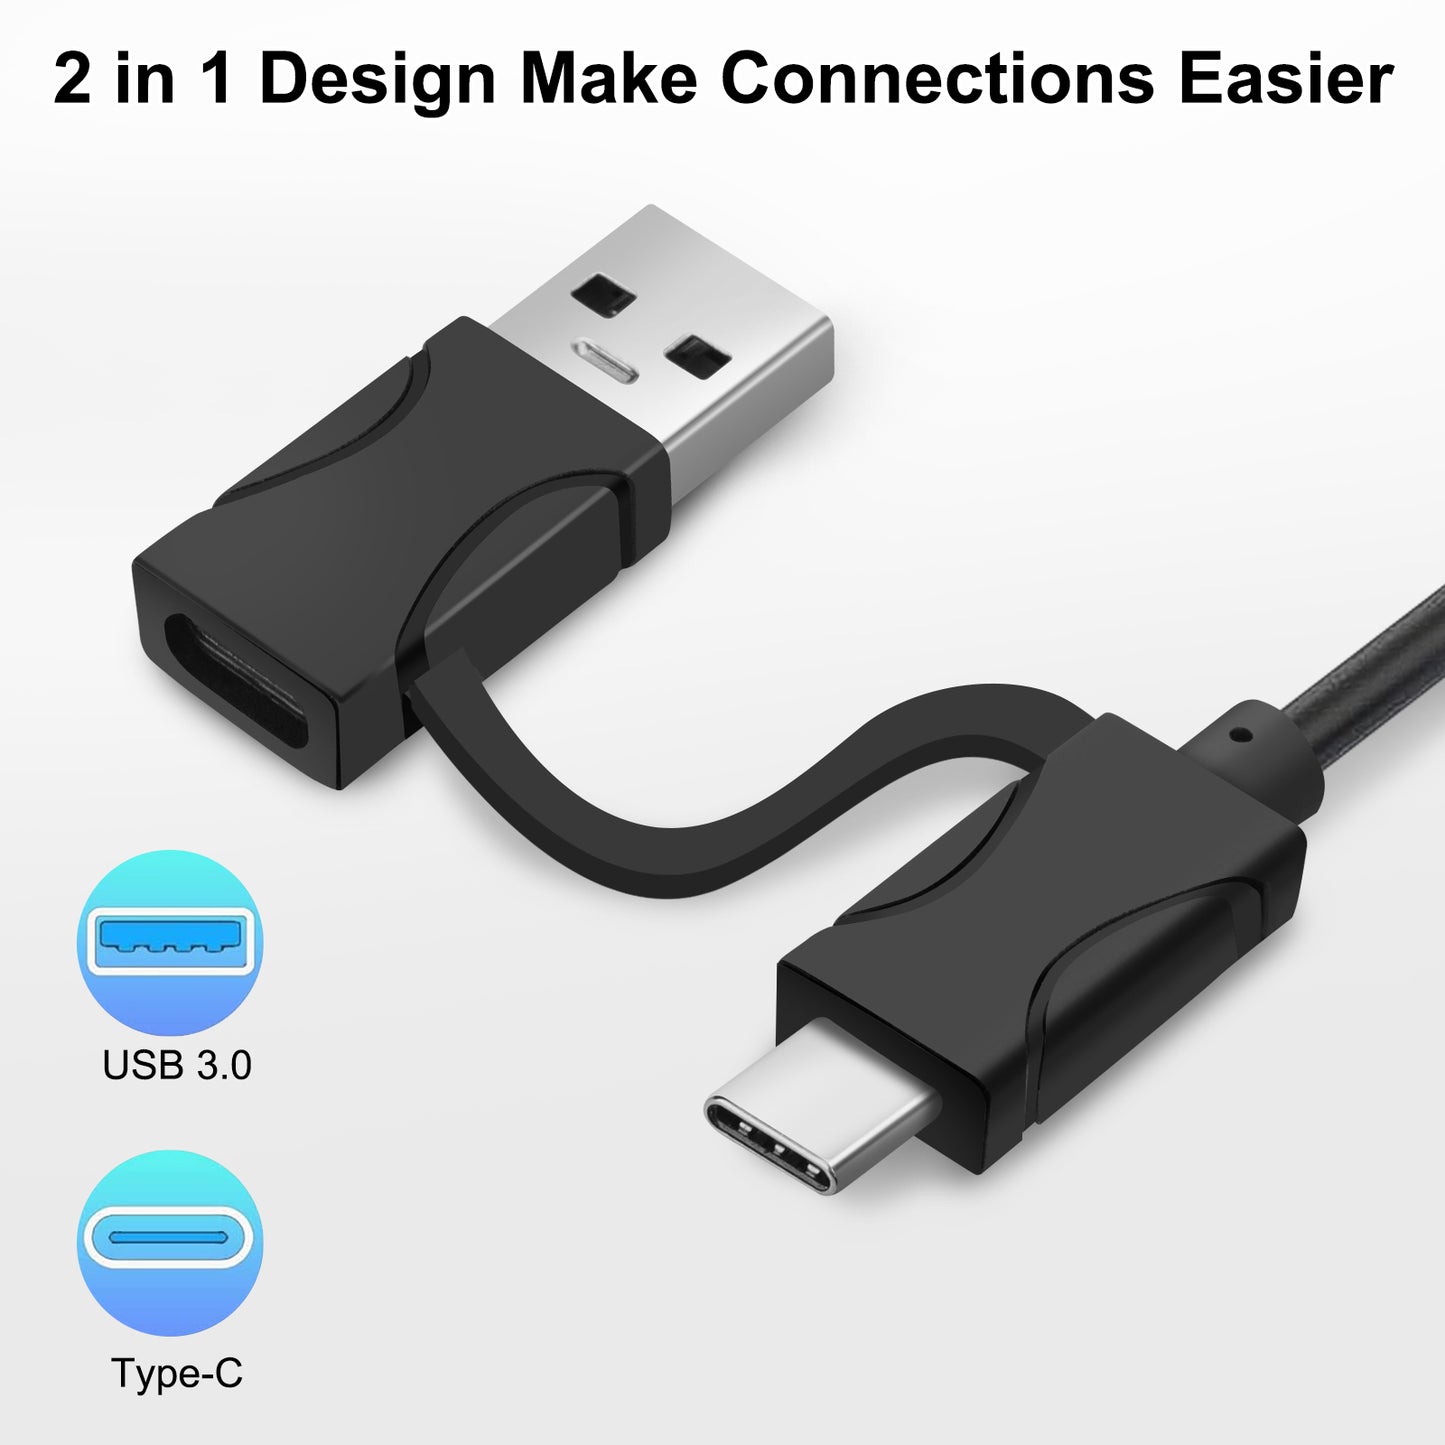 8 in 1 USB C & USB 3.0 Multi Card Reader Hub - 5 Gps High Speed for Supports SD, TF, CF, XD, MS Cards & 3 USB 3.0 Ports for Simultaneous Use